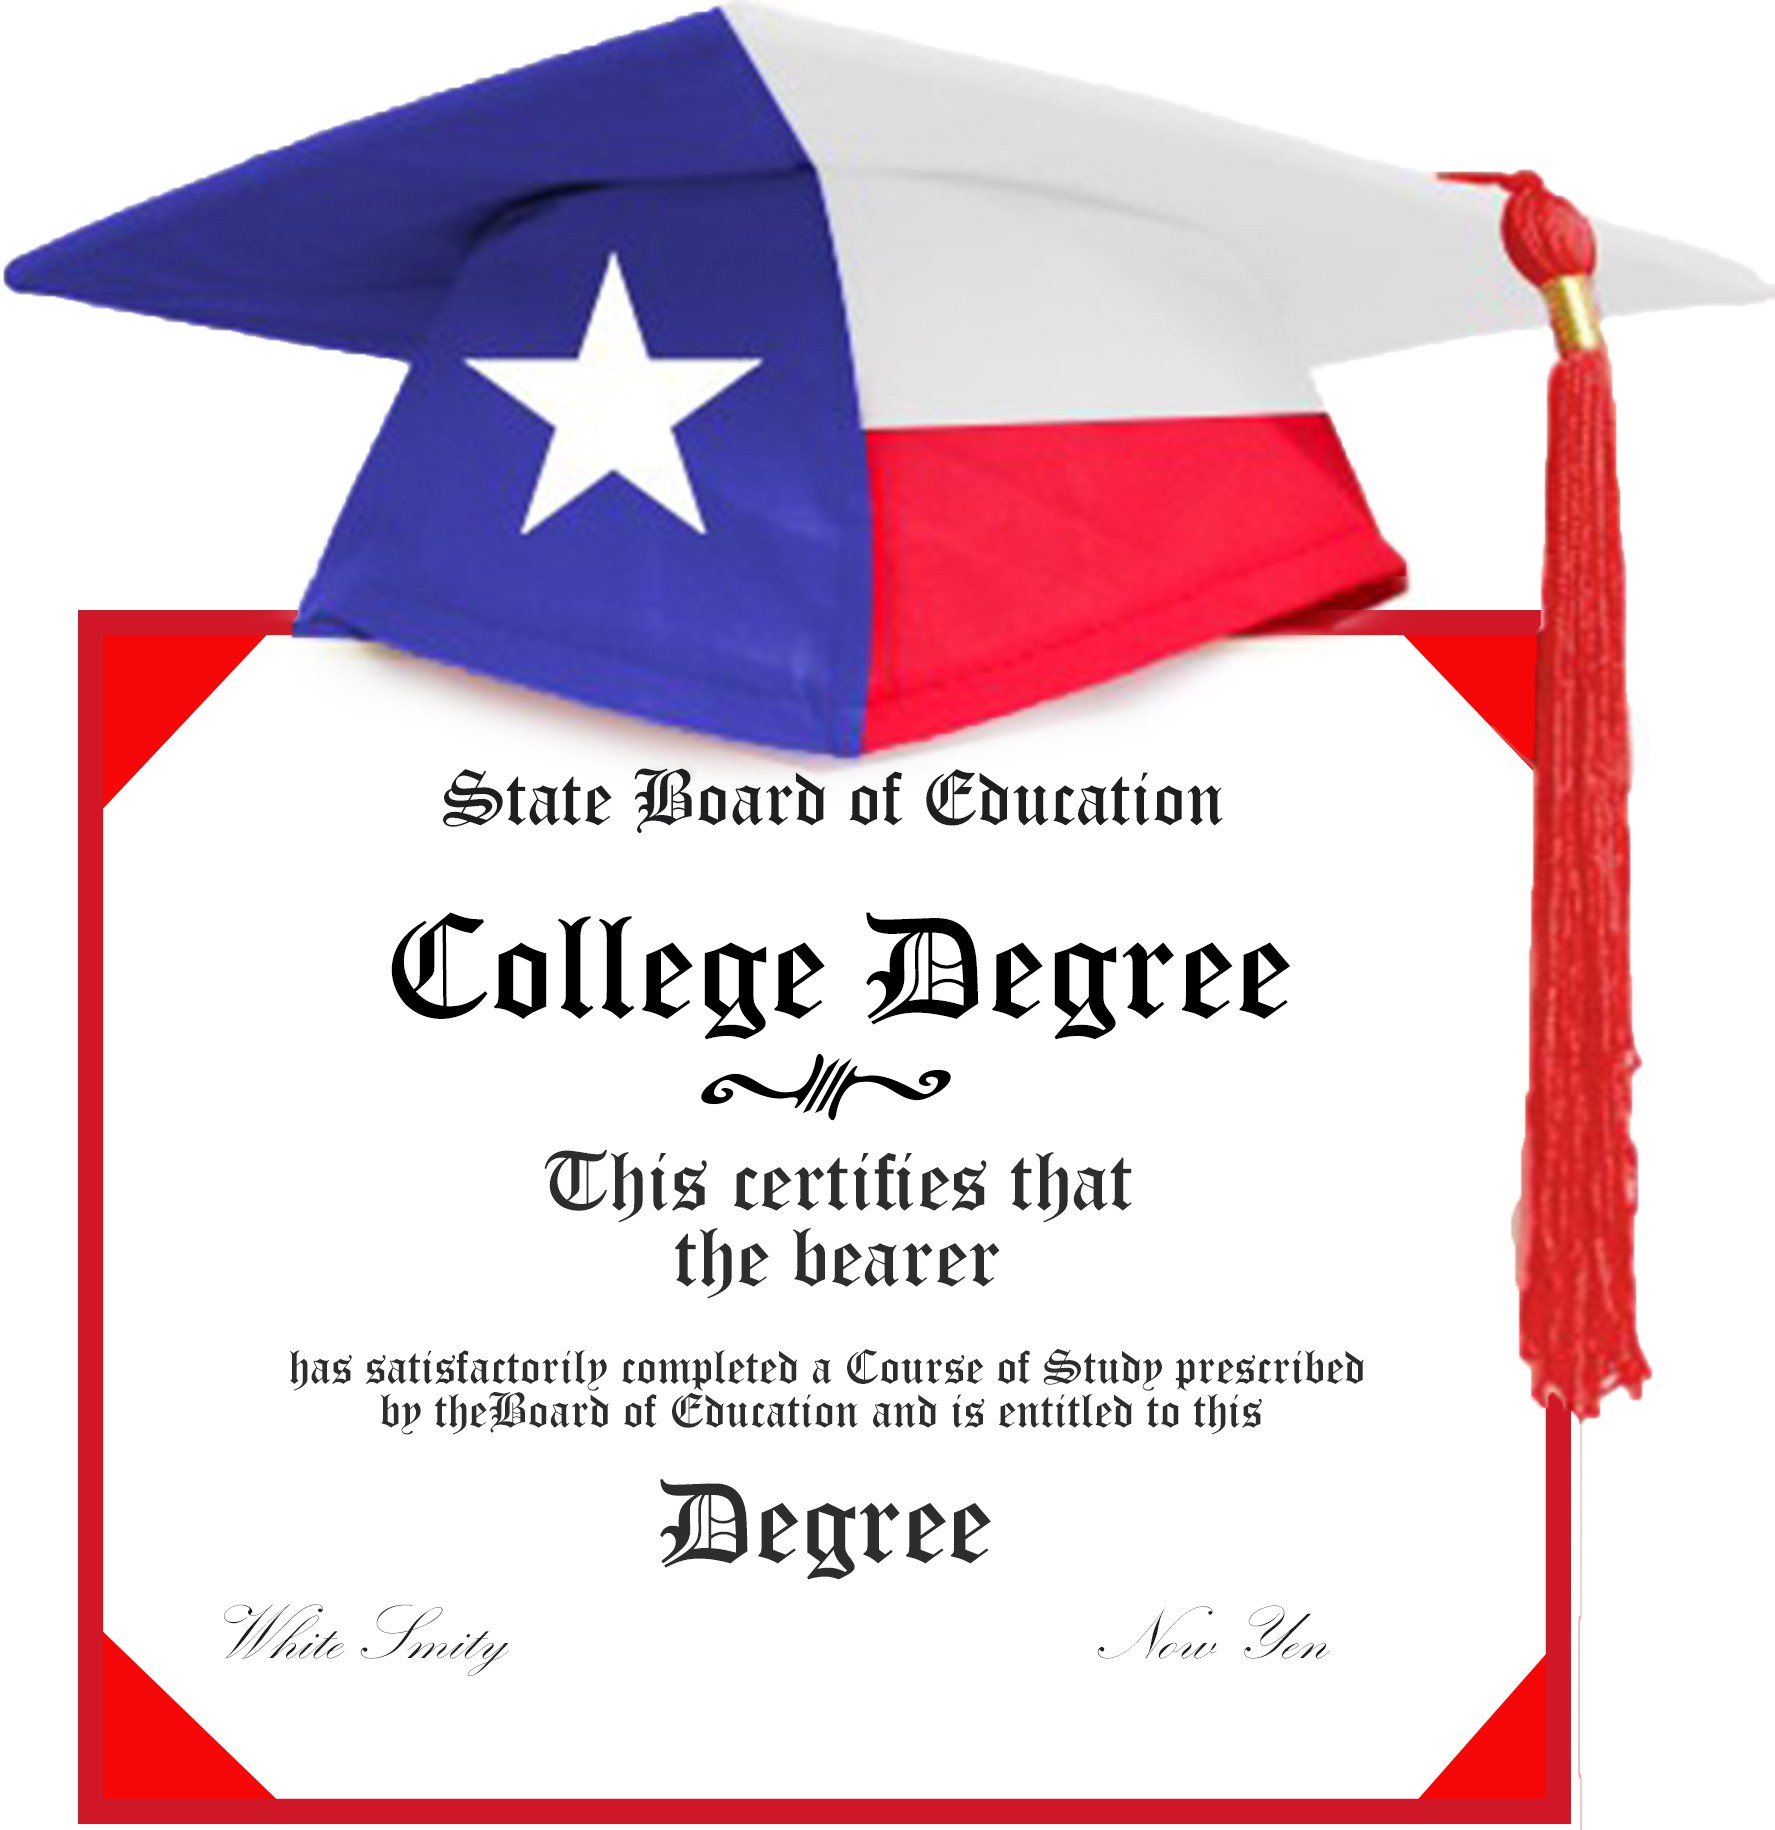 The University of Texas at Brownsville College Degree